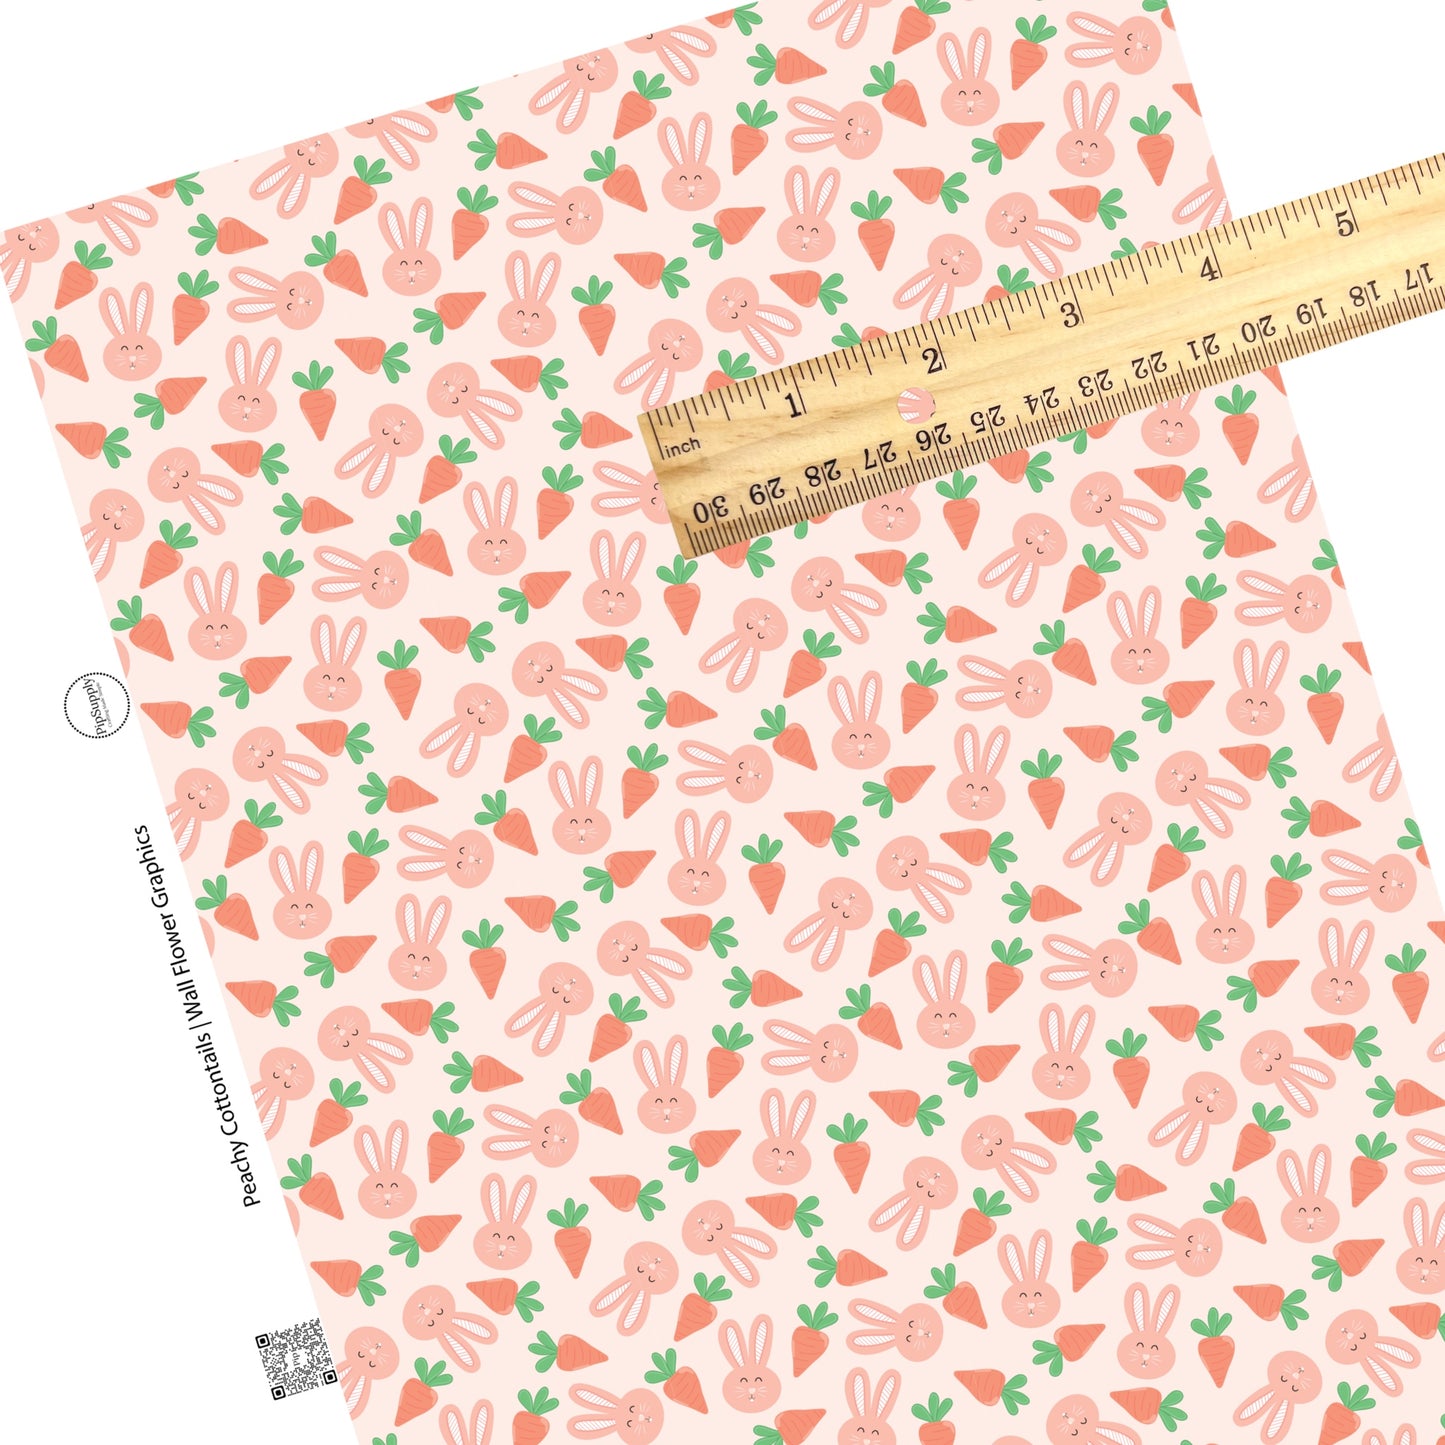 These spring pattern themed faux leather sheets contain the following design elements: bunnies surrounded by carrots on light peach. Our CPSIA compliant faux leather sheets or rolls can be used for all types of crafting projects.